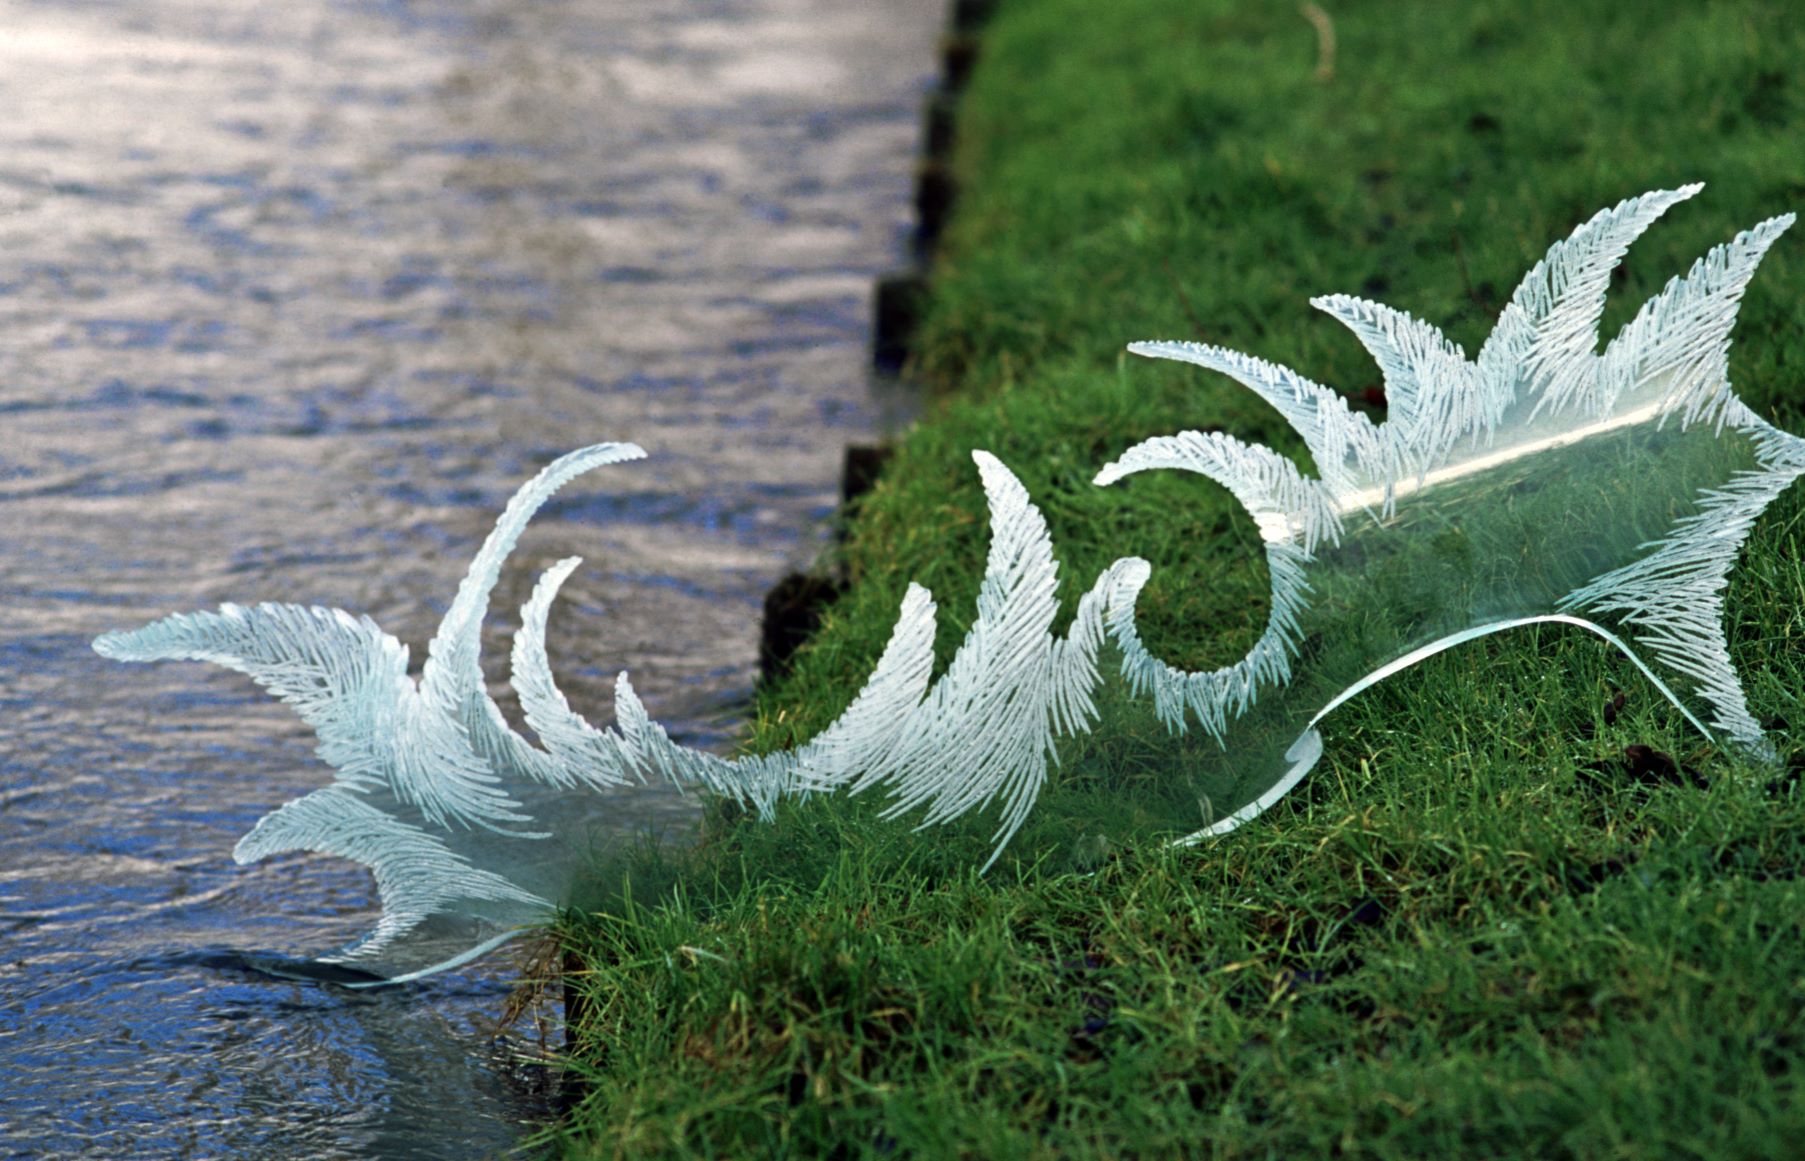 Two Decades of Glass Sculpture by Richard Jackson and Sally Fawkes